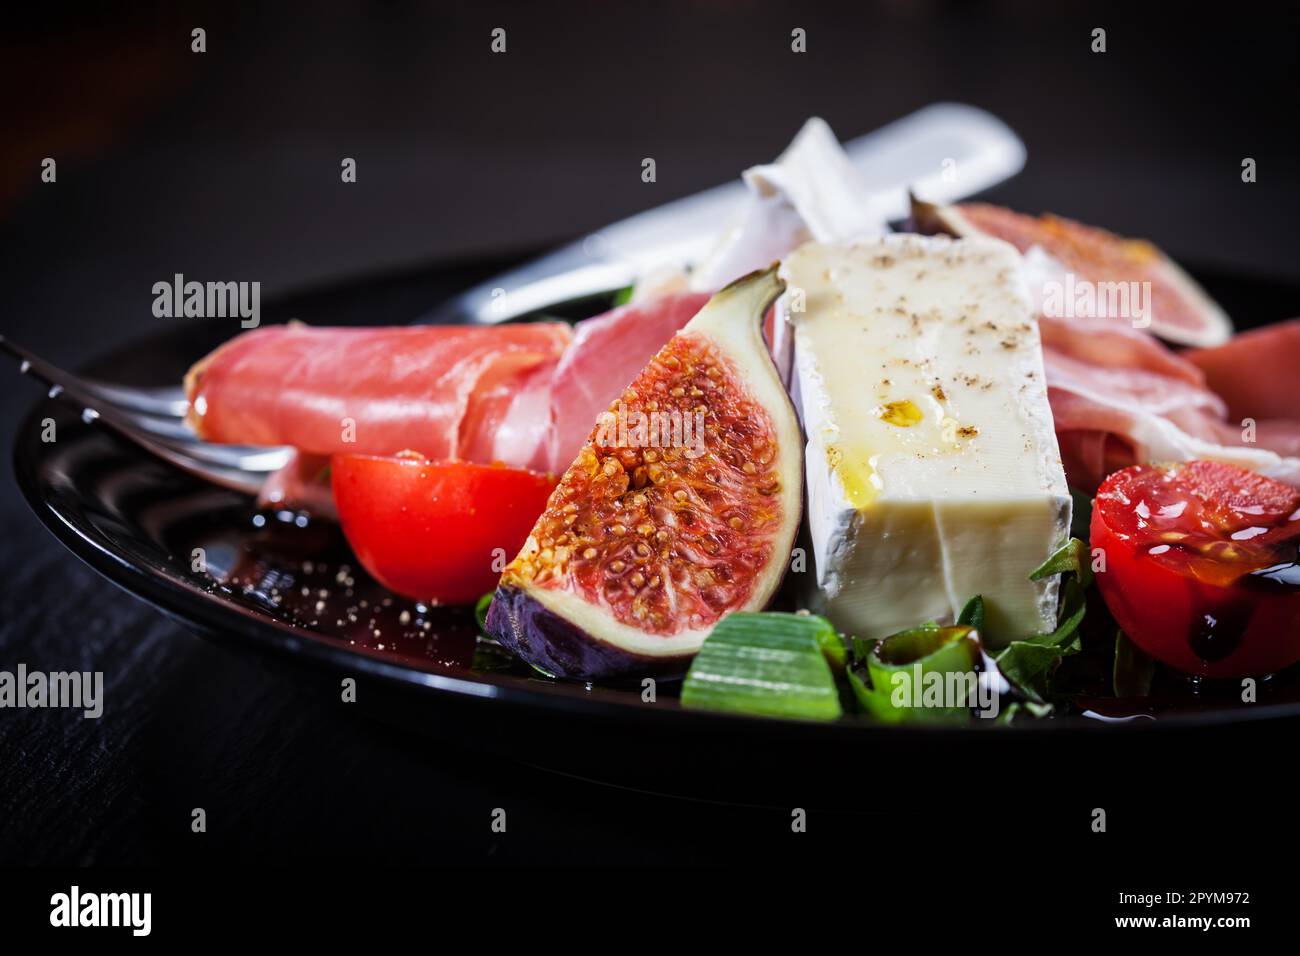 Antipasti plate with fresh figs, cheese and prosciutto Stock Photo